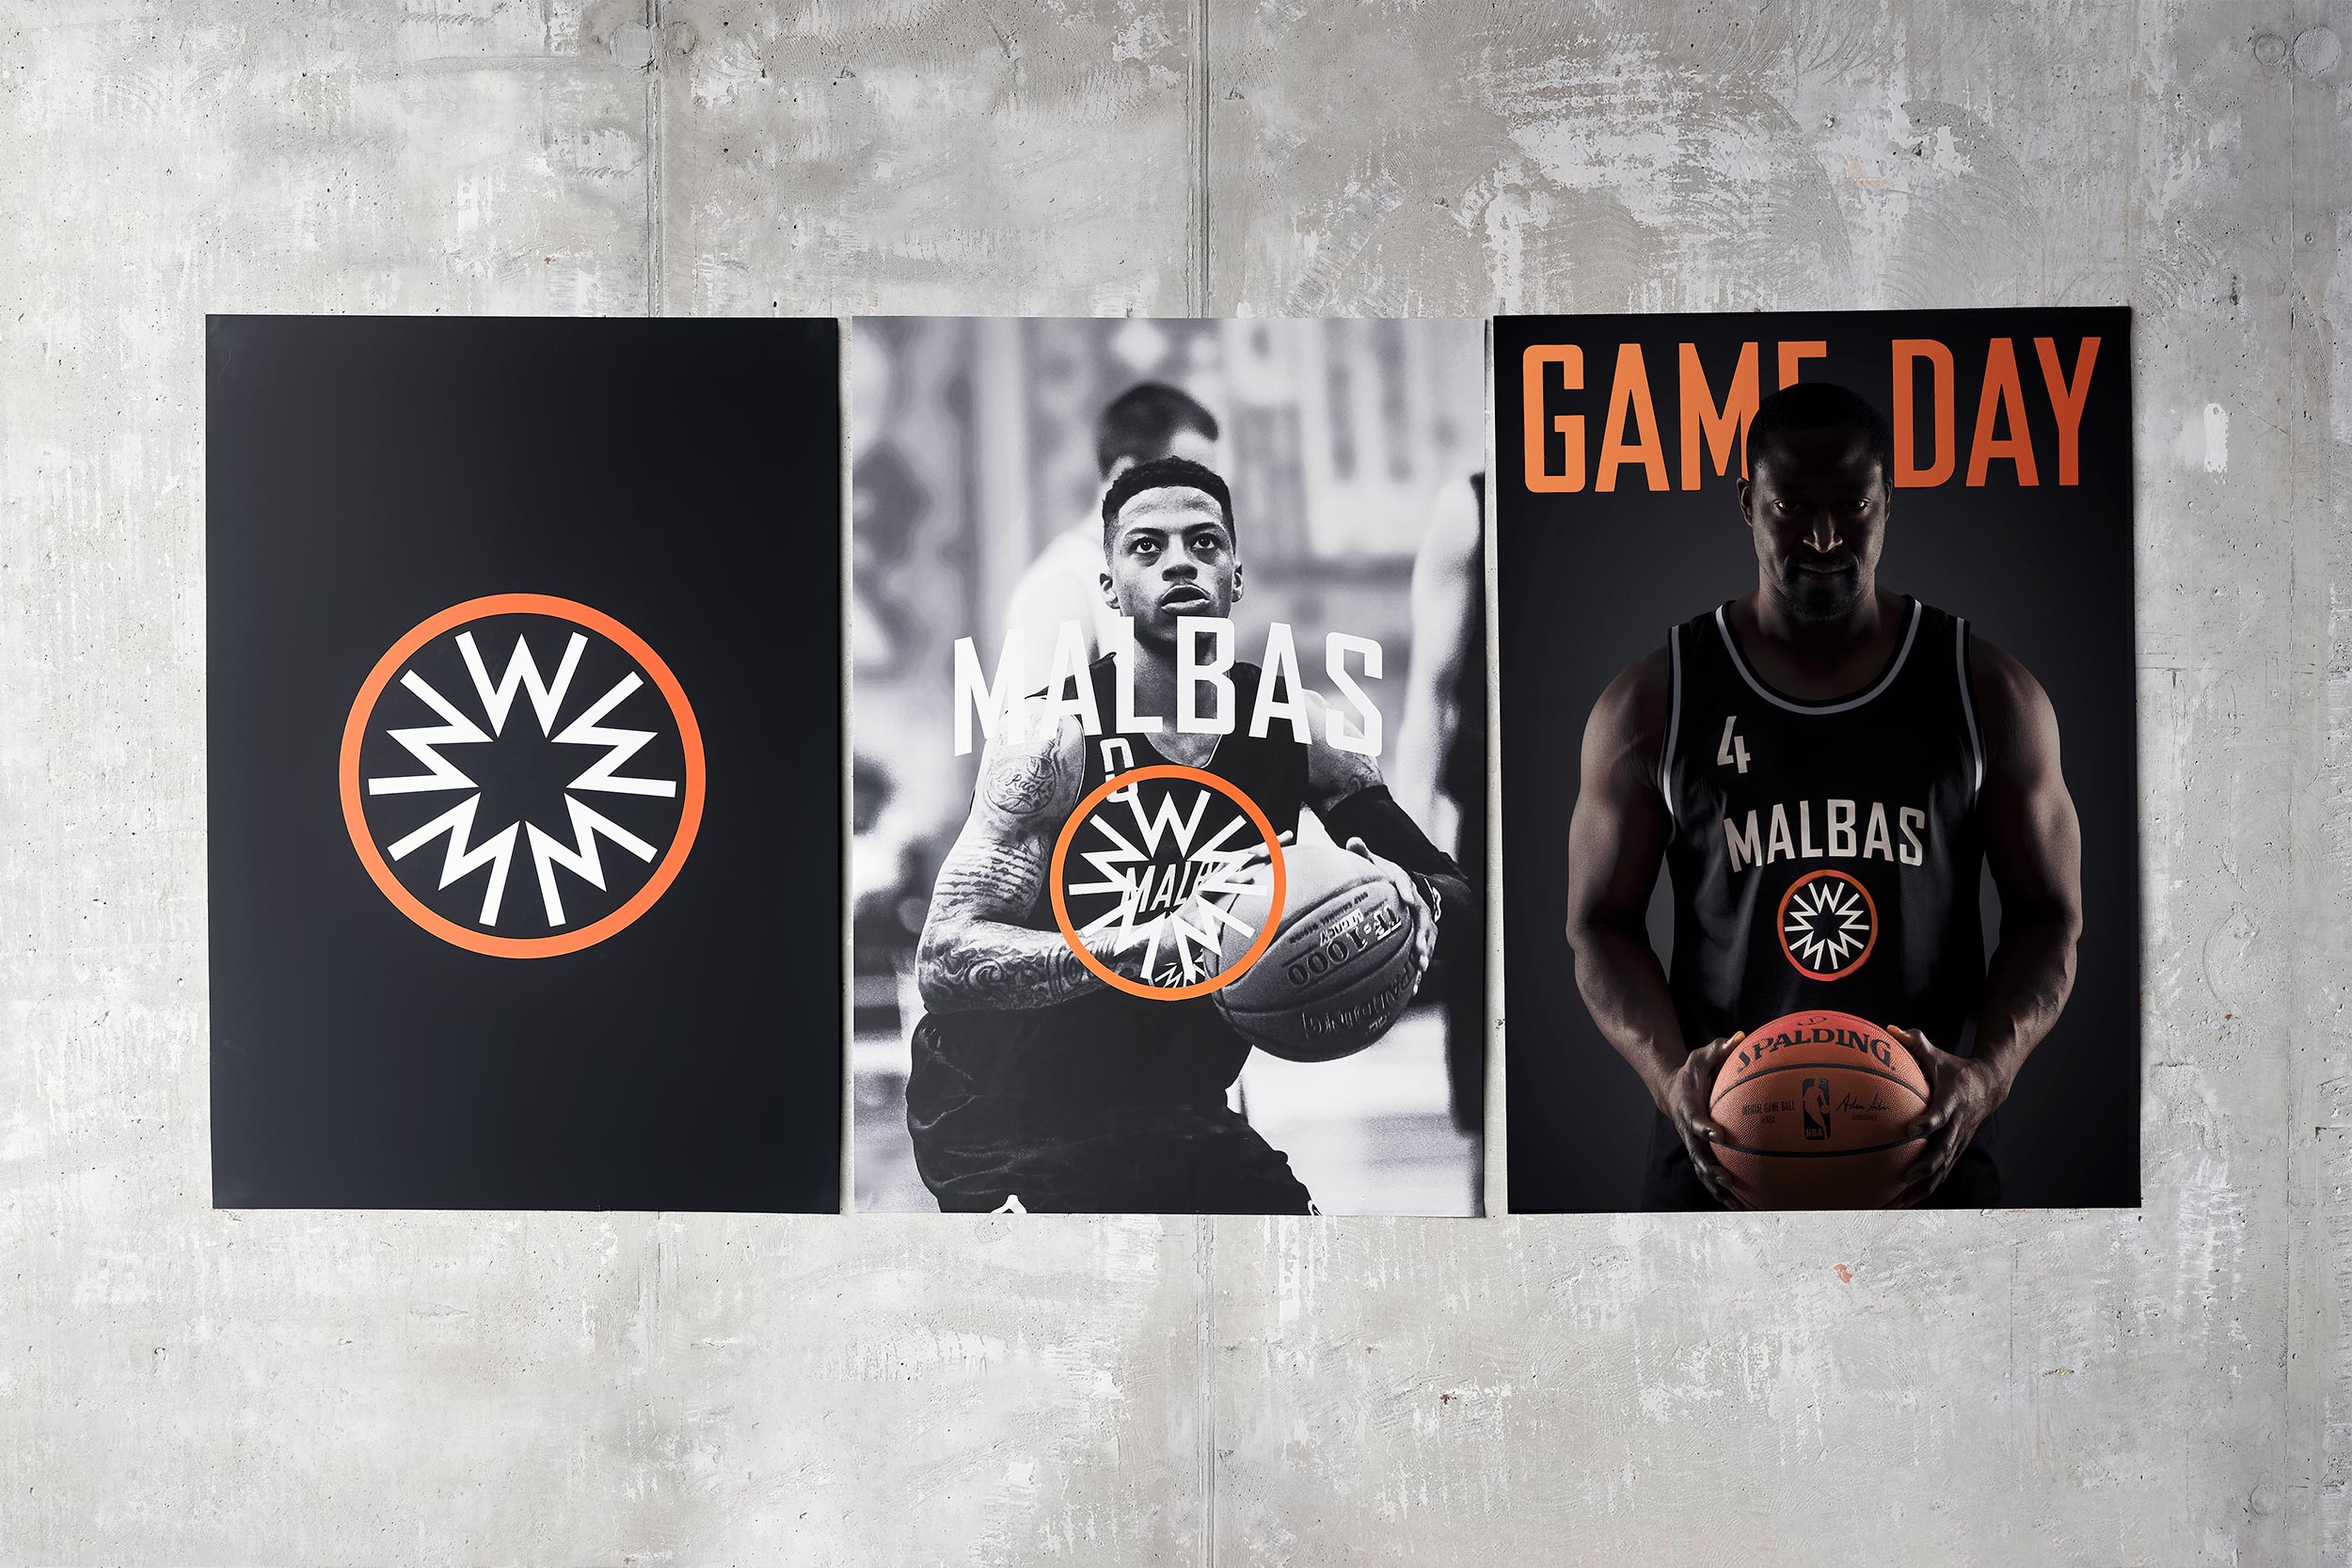 neumeister brand design malbas logotype basketball posters wall